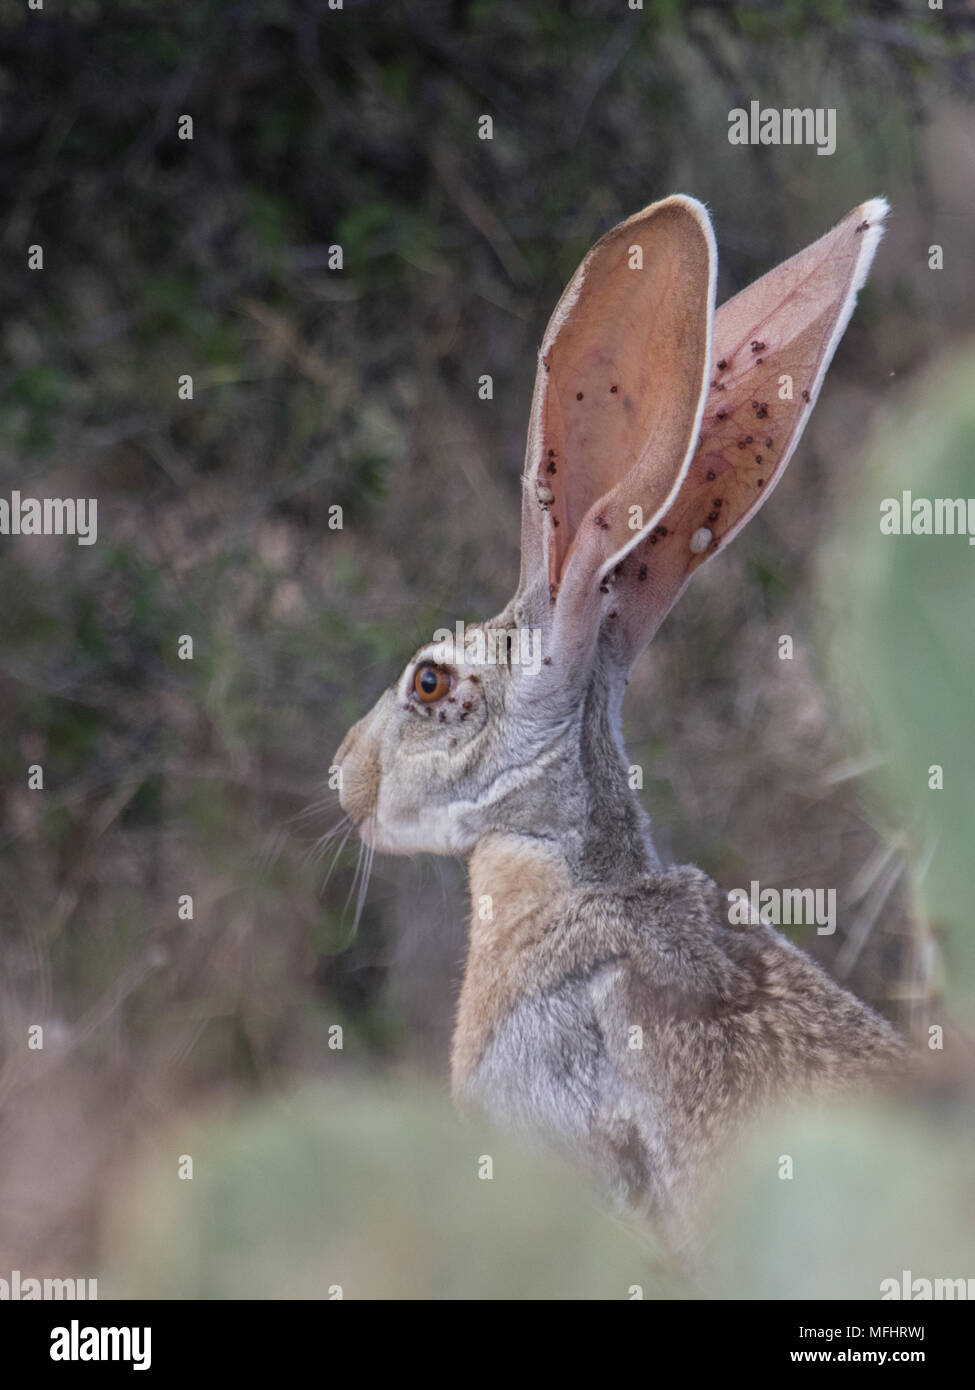 An antelope jackrabbit in the Sonoran desert and infested with ticks. Stock Photo